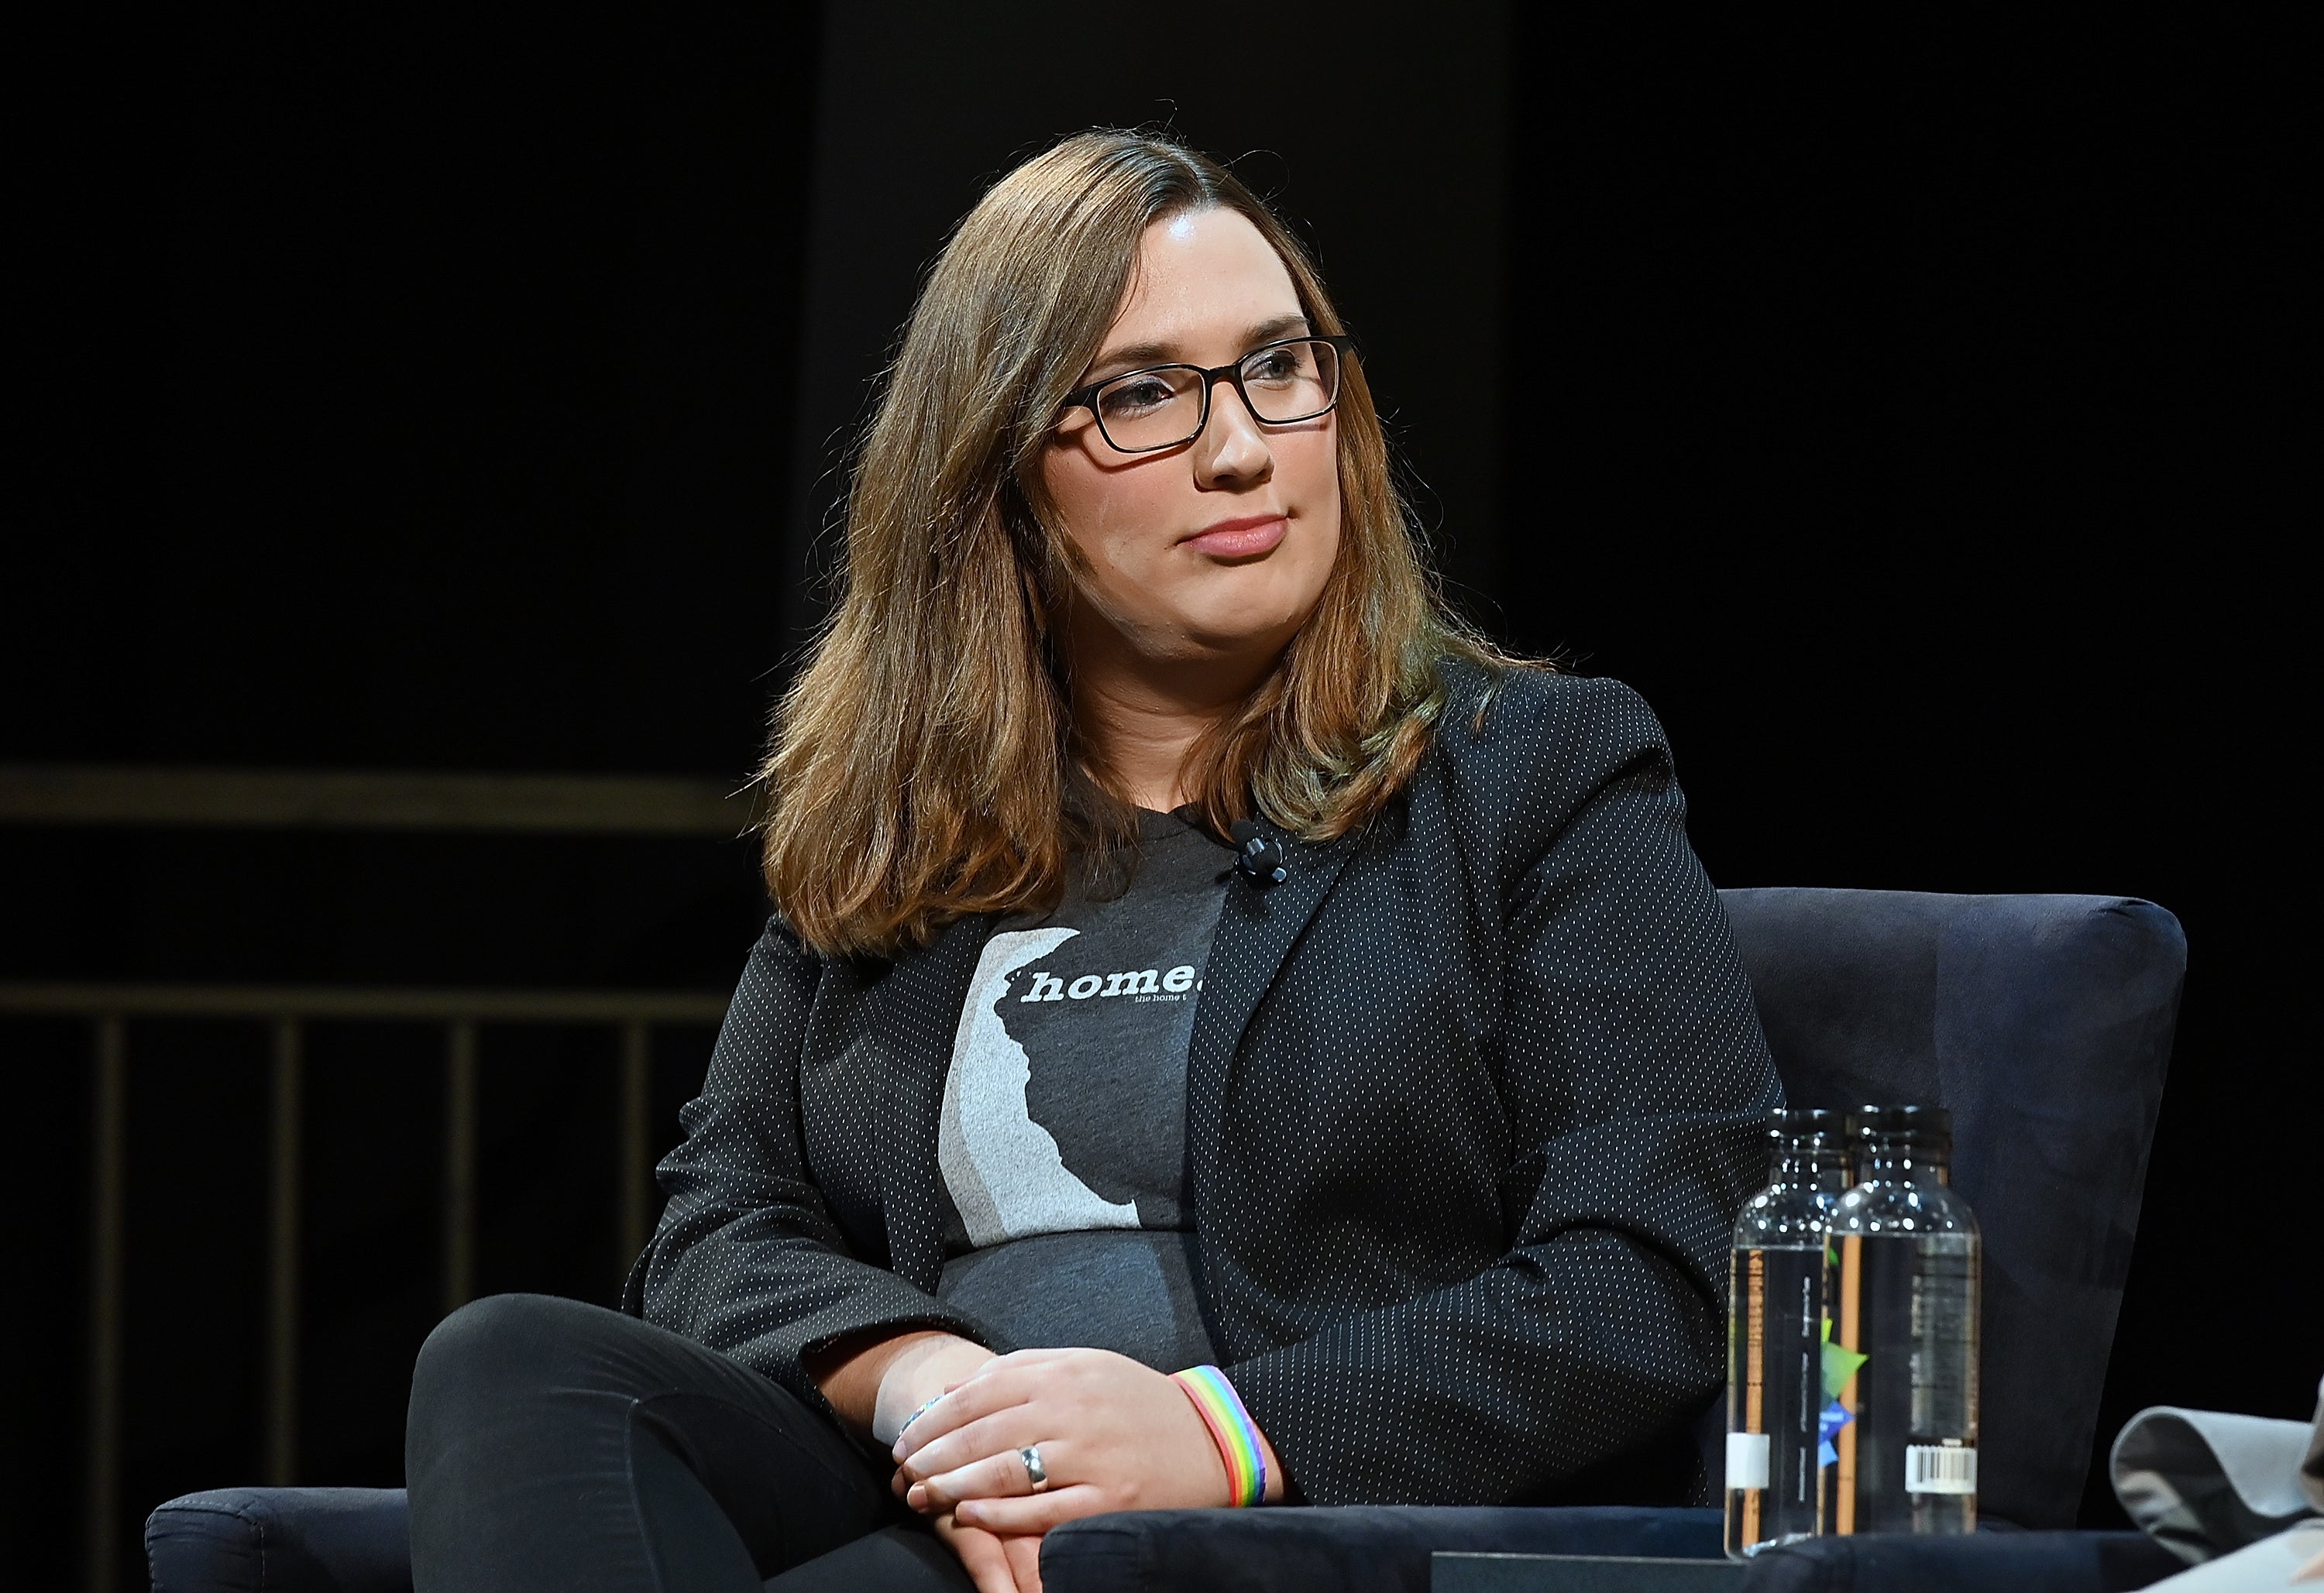 Sarah McBride attends "Out in Office" panel at Tribeca Celebrates Pride Day at 2019 Tribeca Film Festival at Spring Studio on May 4, 2019 in New York City.